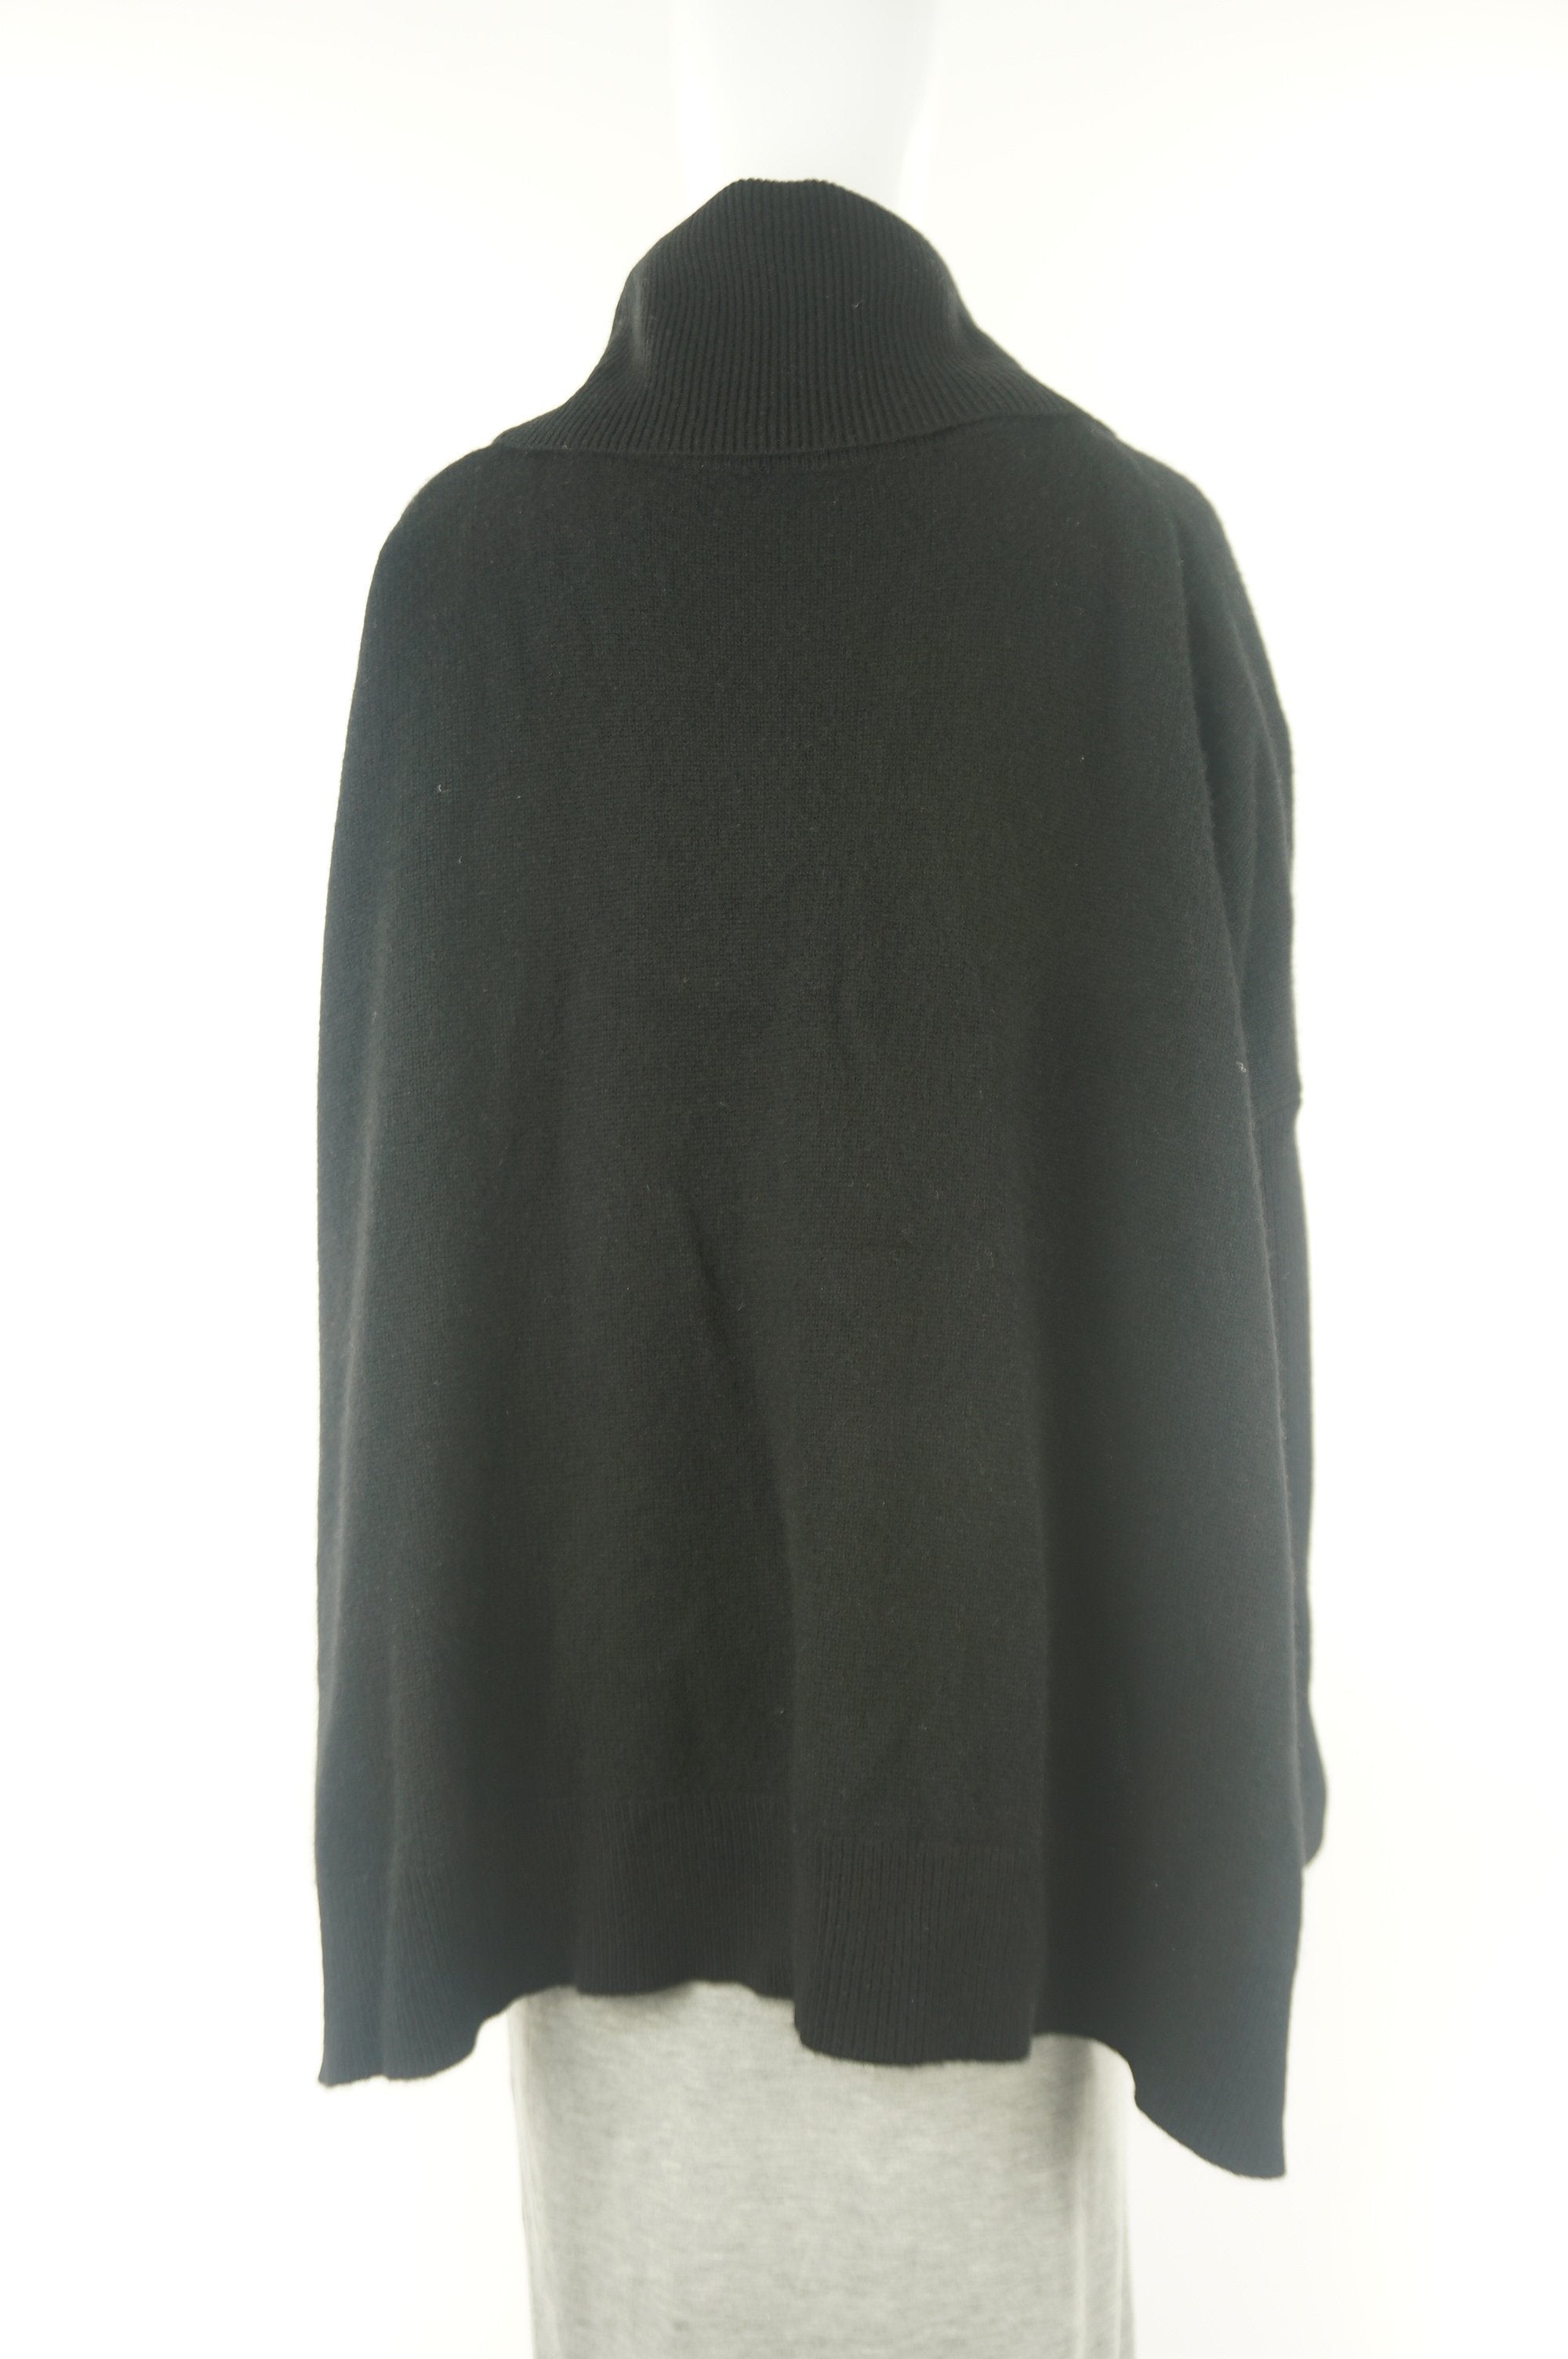 Lord & Taylor Cashmere Cape Poncho, Super soft pullover for a warm and elegant look., Black, 100% Cashmere, 